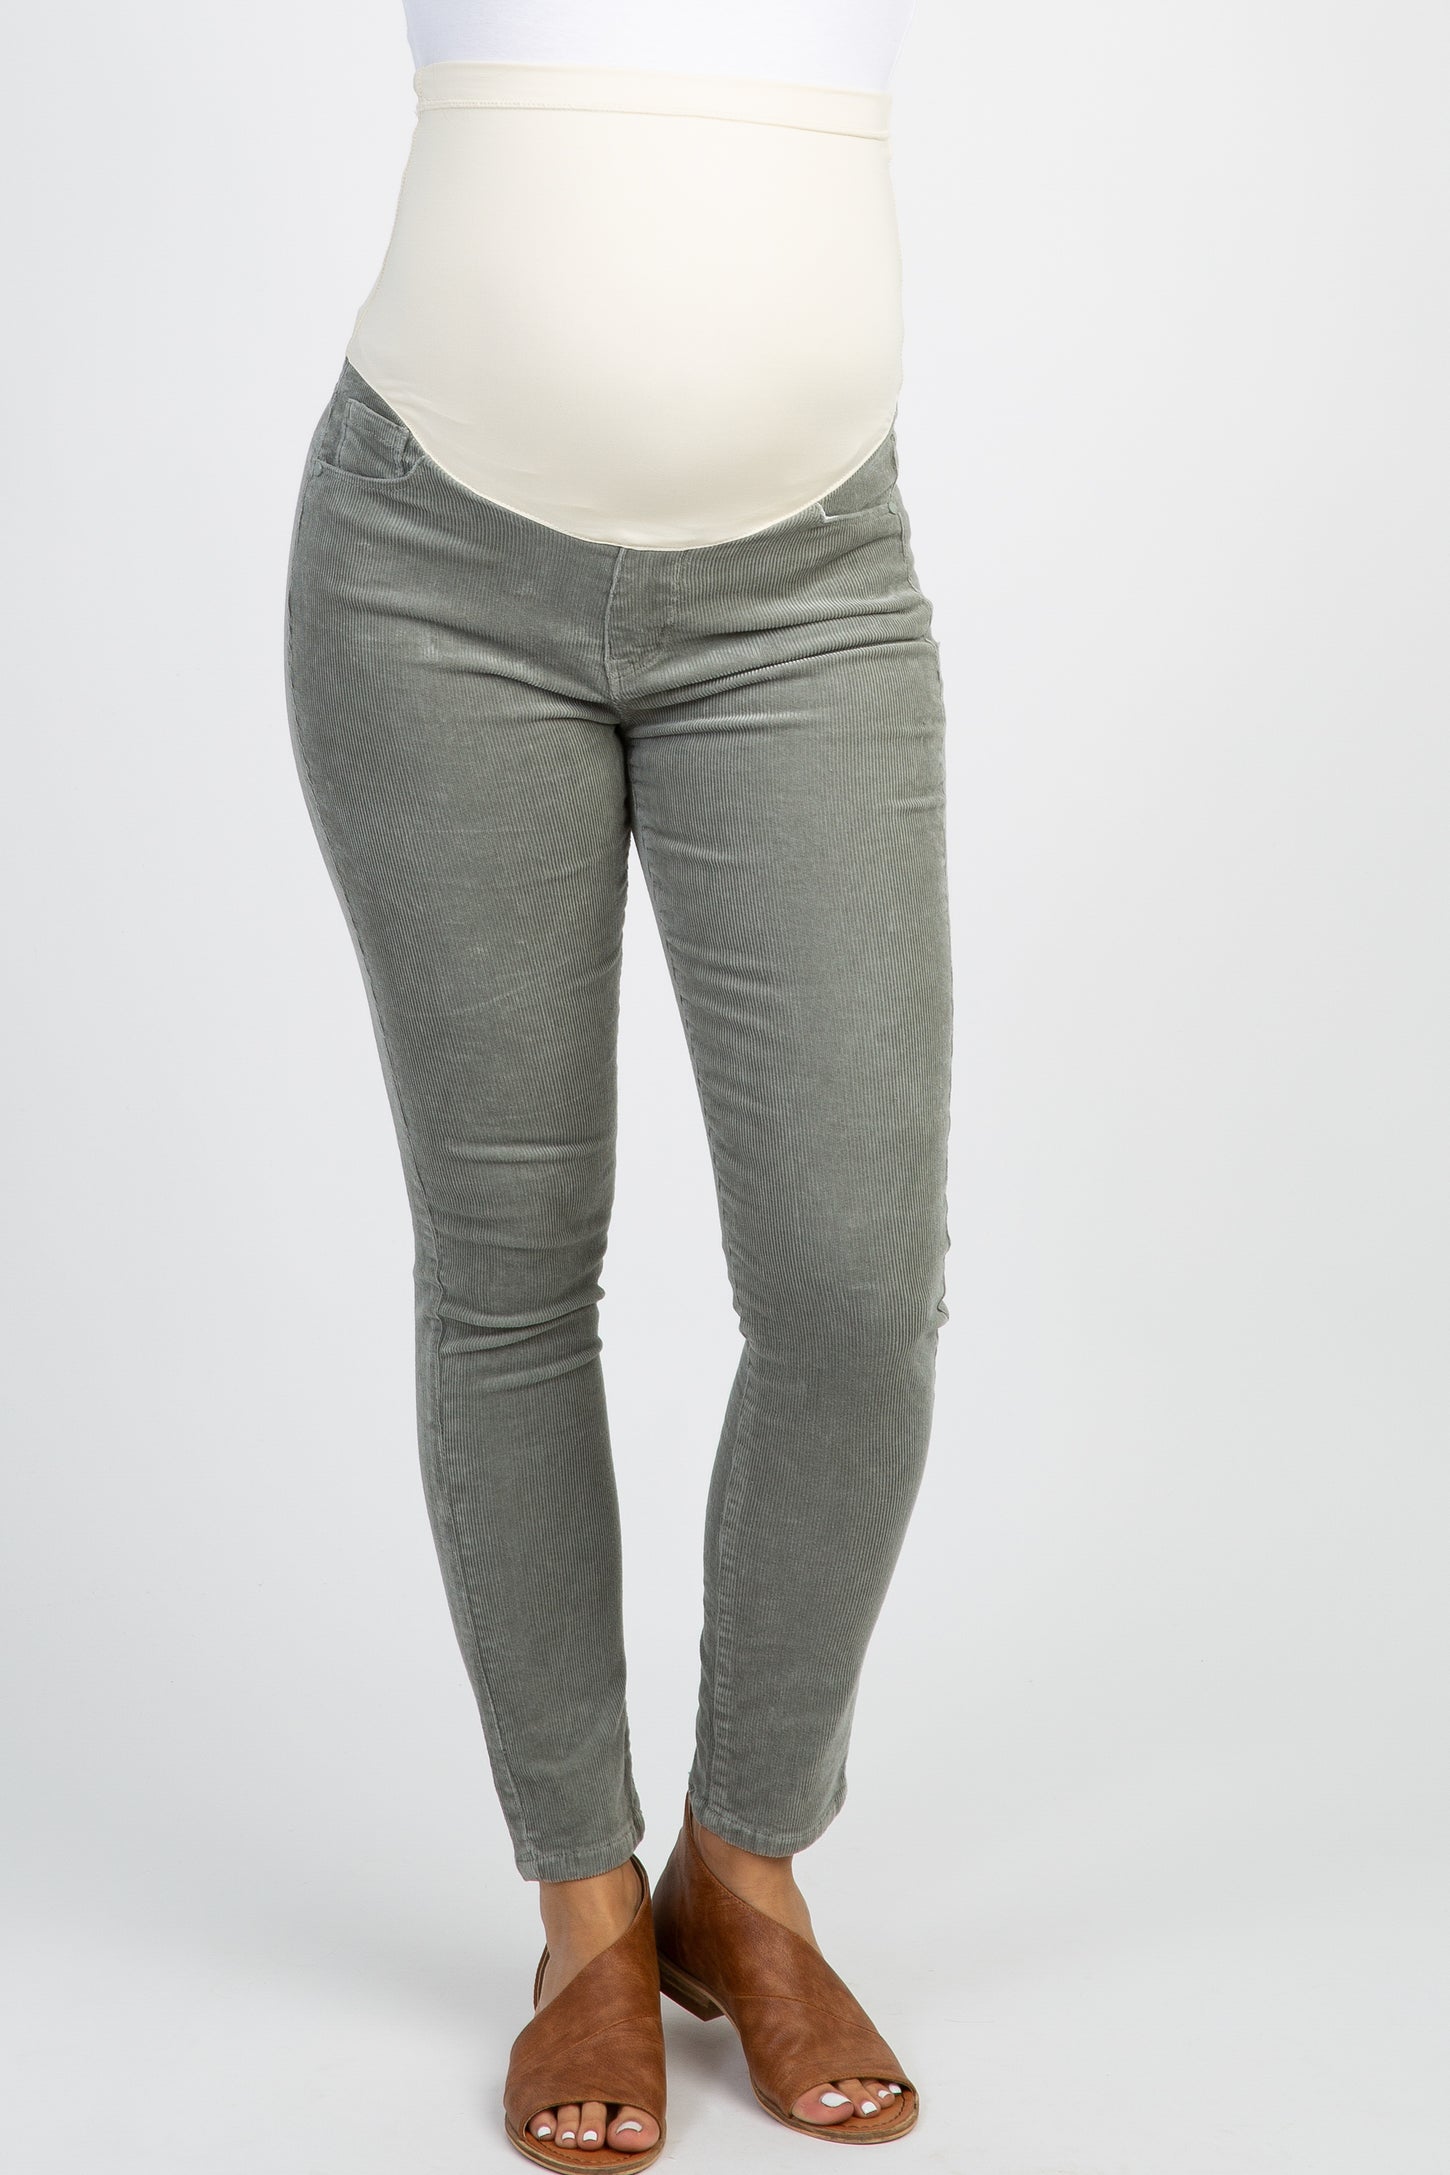 PinkBlush Grey Ribbed Suede Maternity Pants